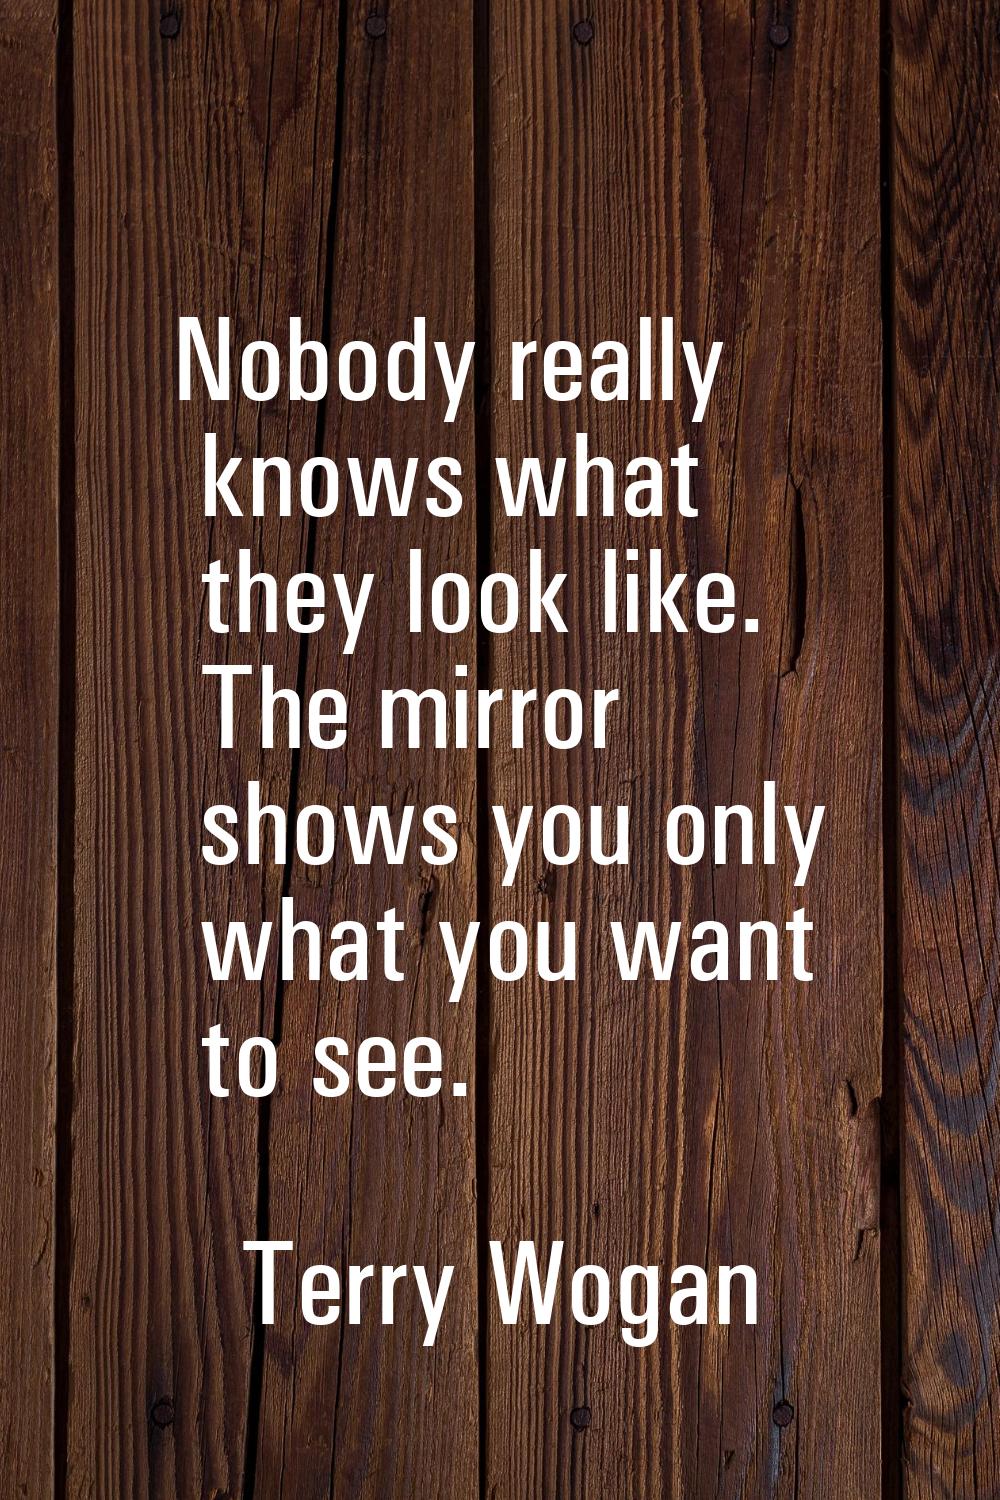 Nobody really knows what they look like. The mirror shows you only what you want to see.